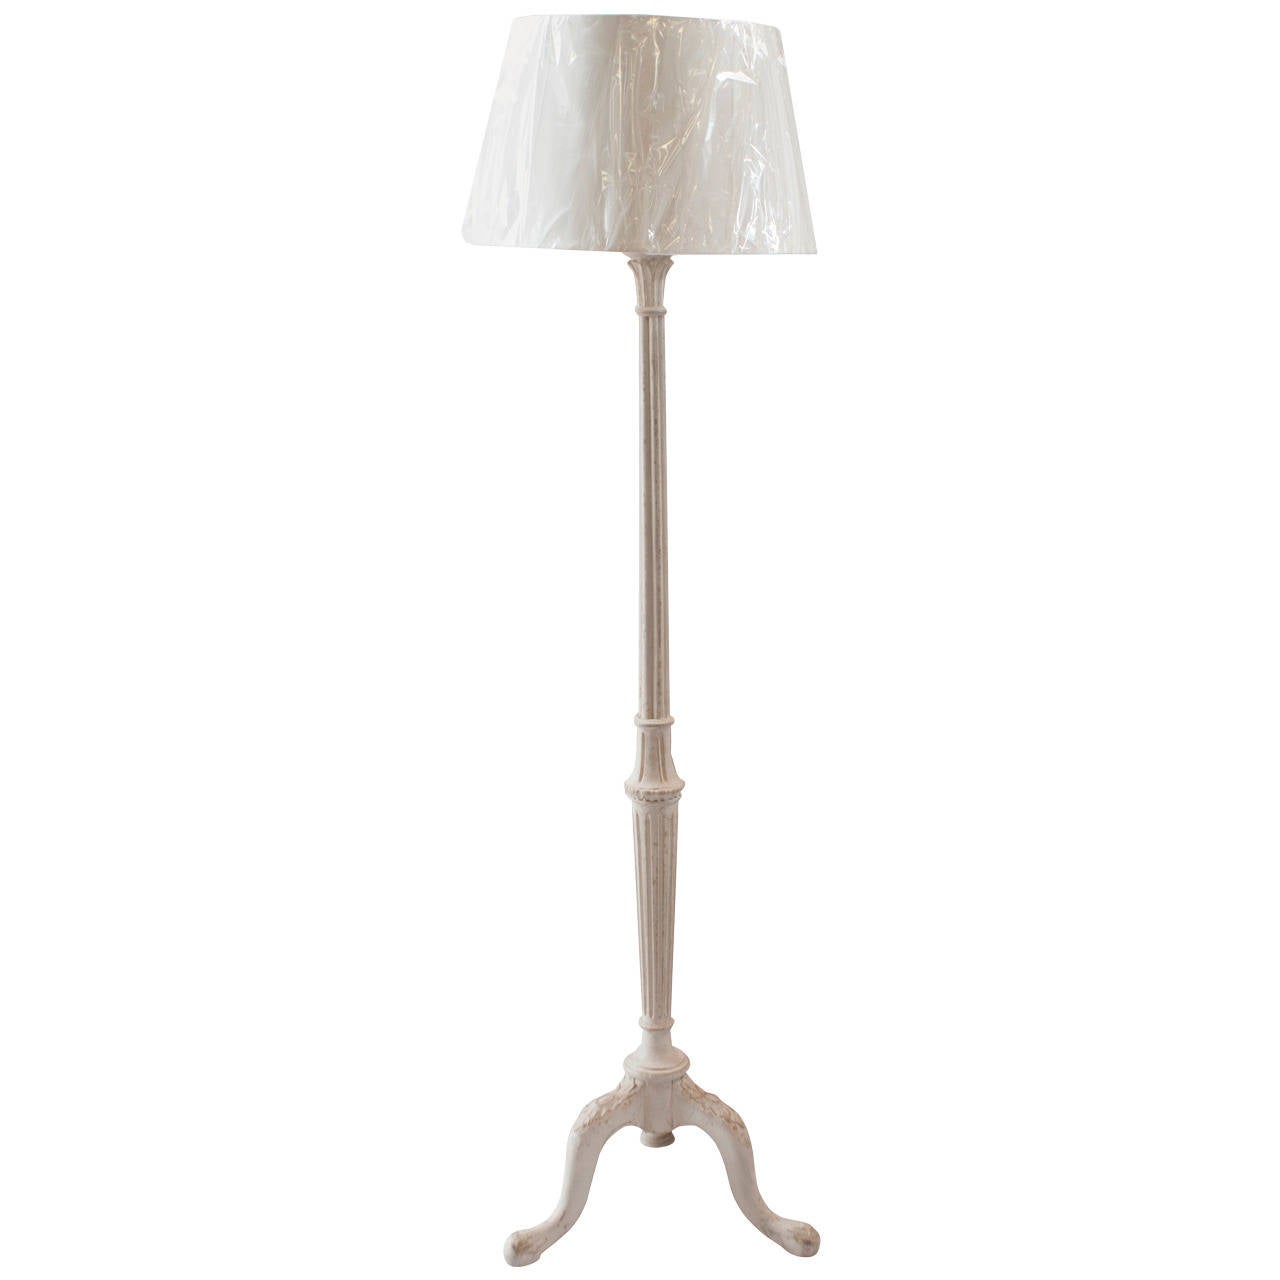 Light Grey Painted Floor Lamp For Sale at 1stdibs